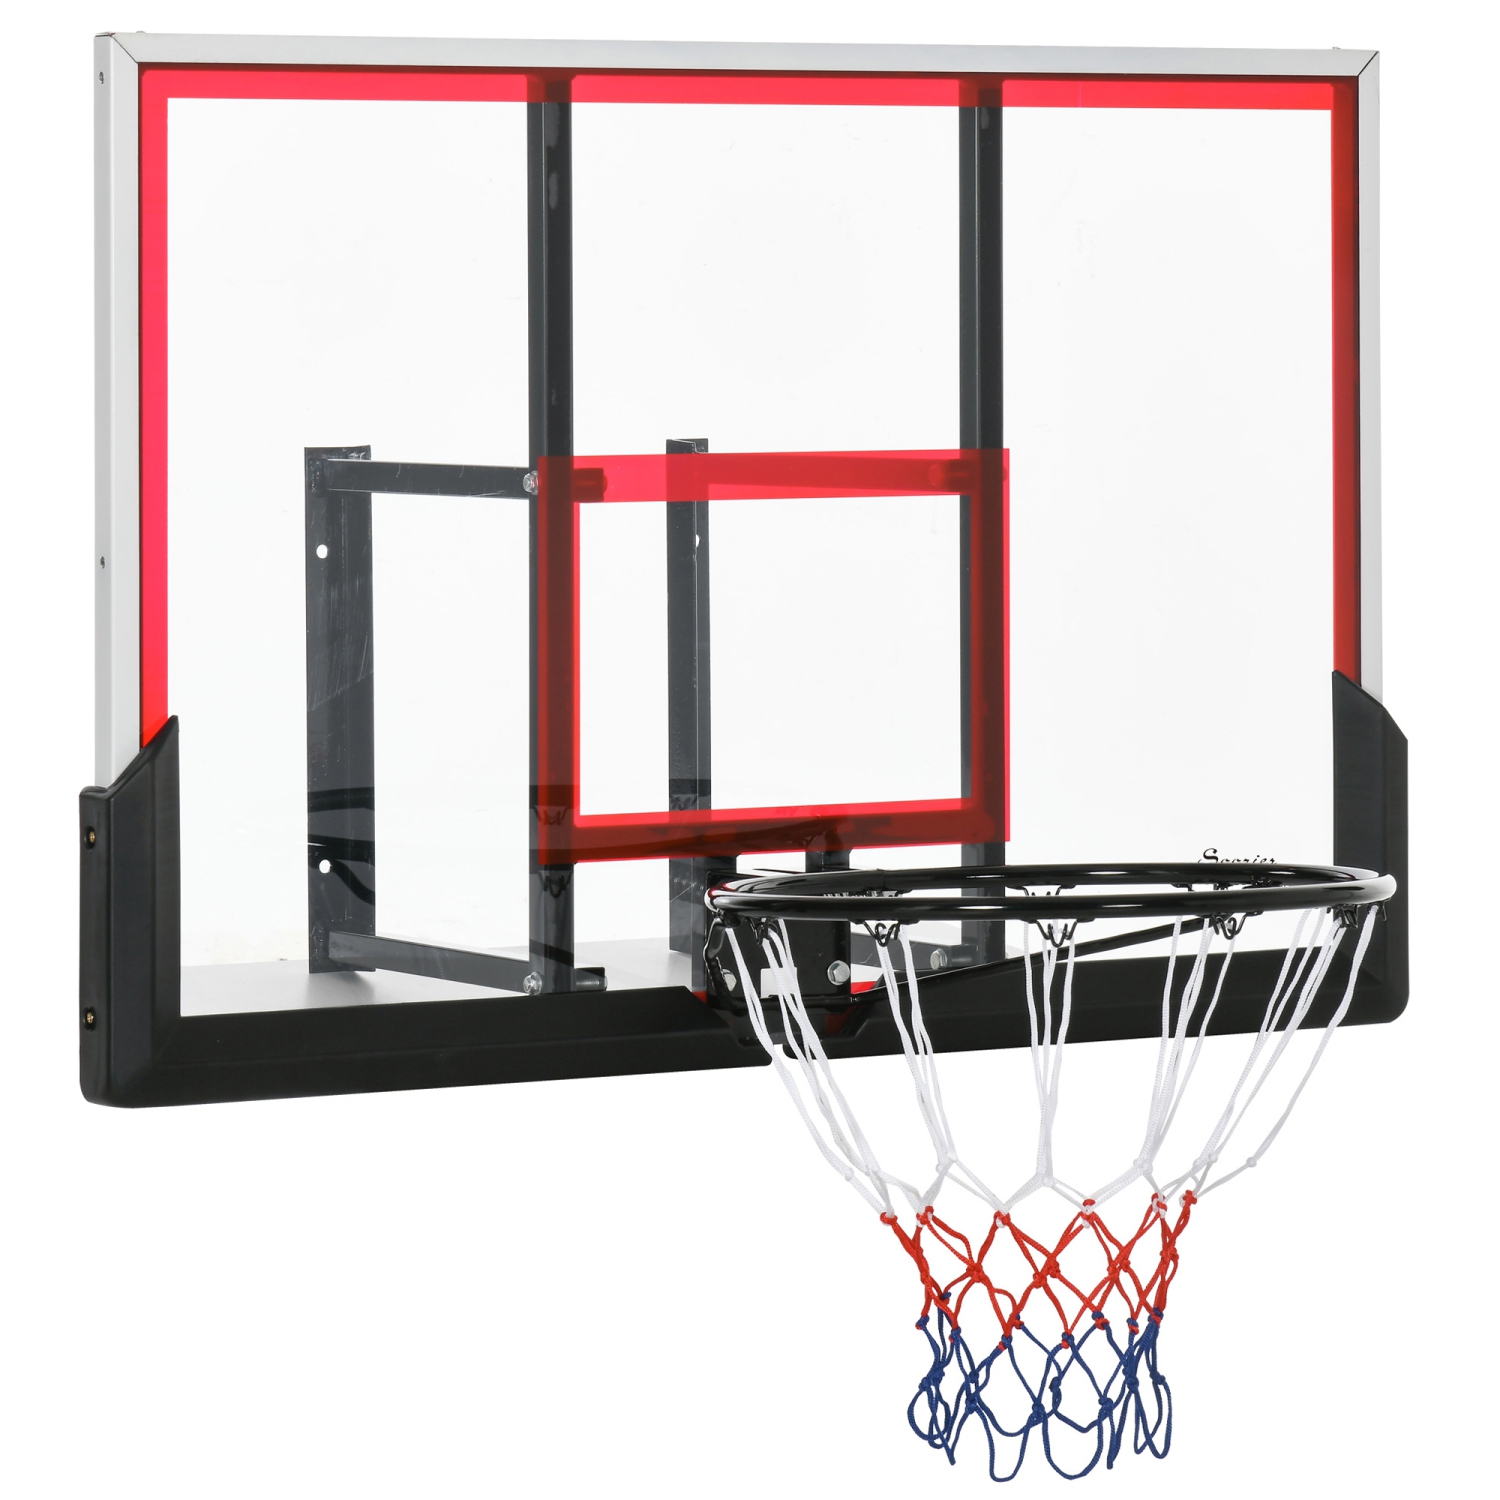 Soozier Wall Mounted Basketball Hoop, Backboard and Rim Combo, with 43'' x 30'' Shatter Proof Backboard, Durable Bracket and Net, for Indoor and Outdoor